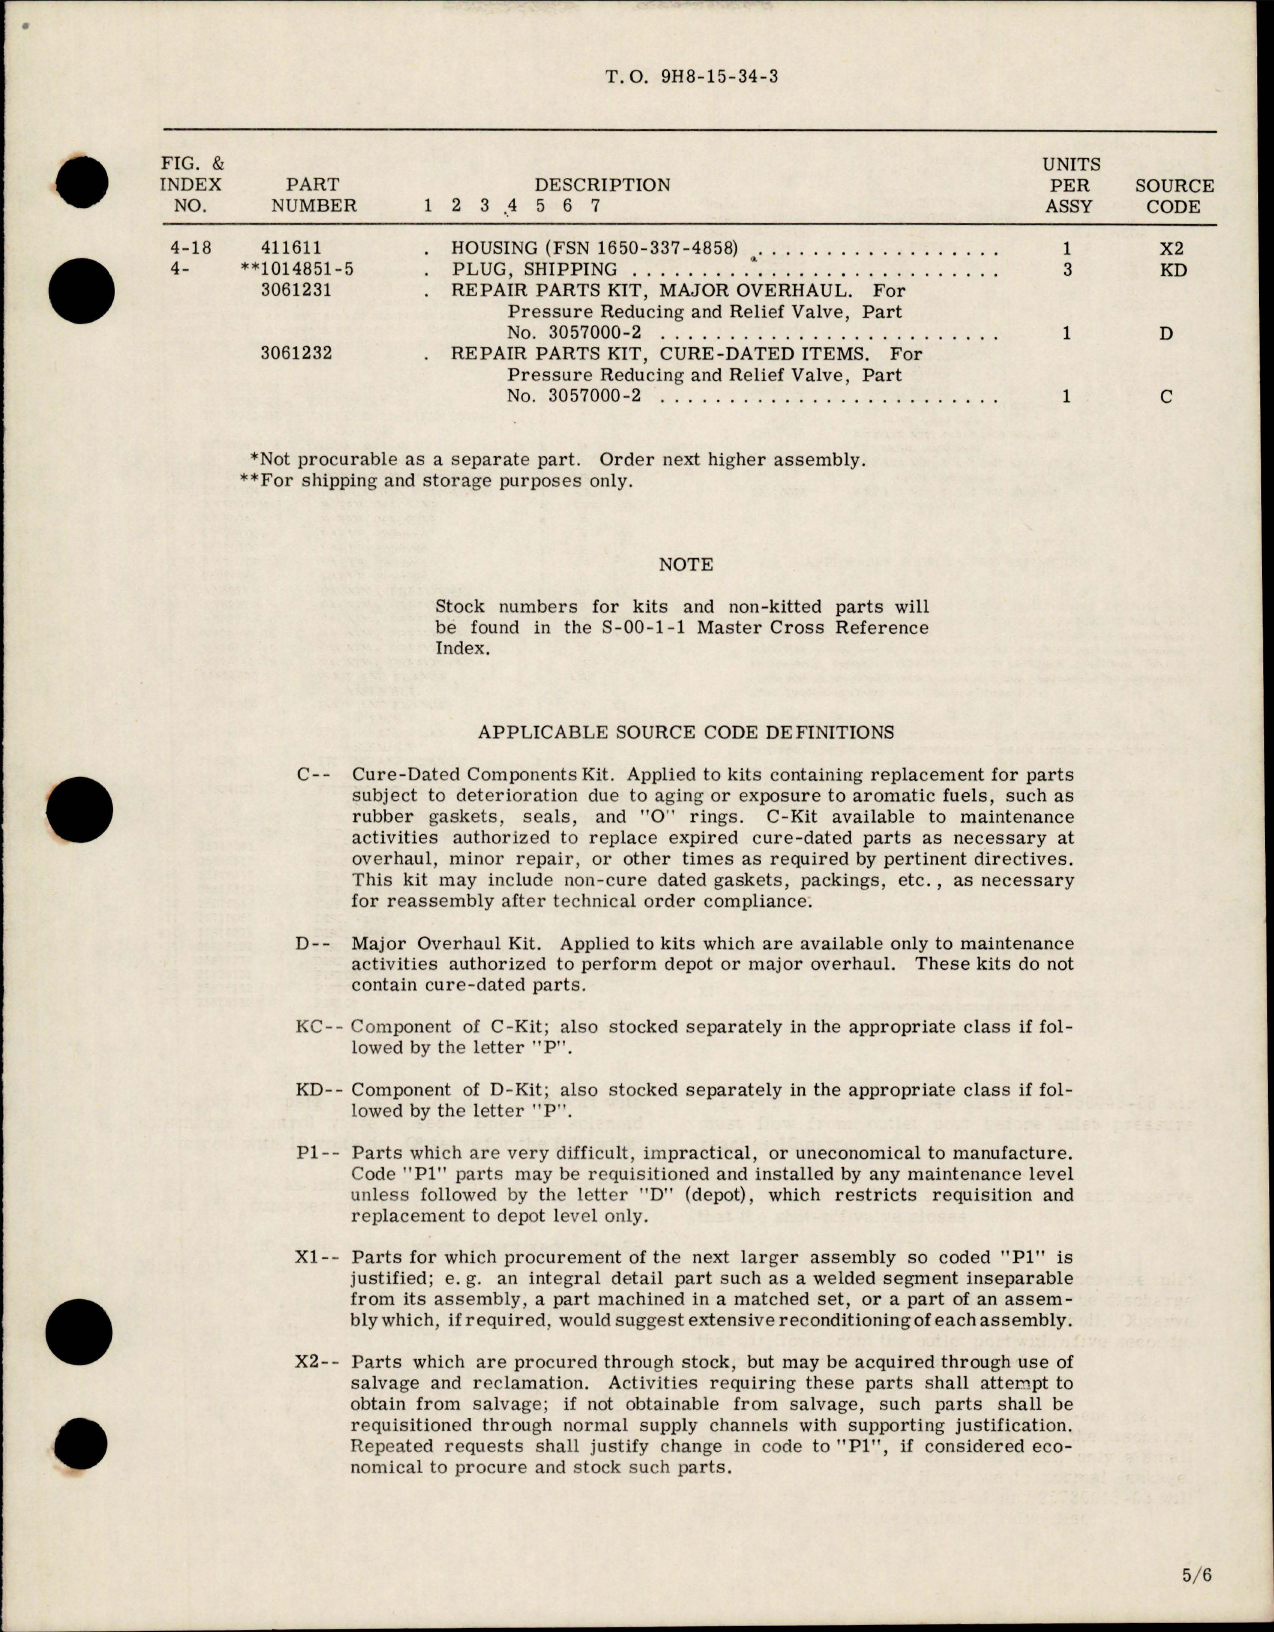 Sample page 5 from AirCorps Library document: Overhaul with Parts Breakdown for Pressure Reducing and Relief Valve - Part 3057000-2